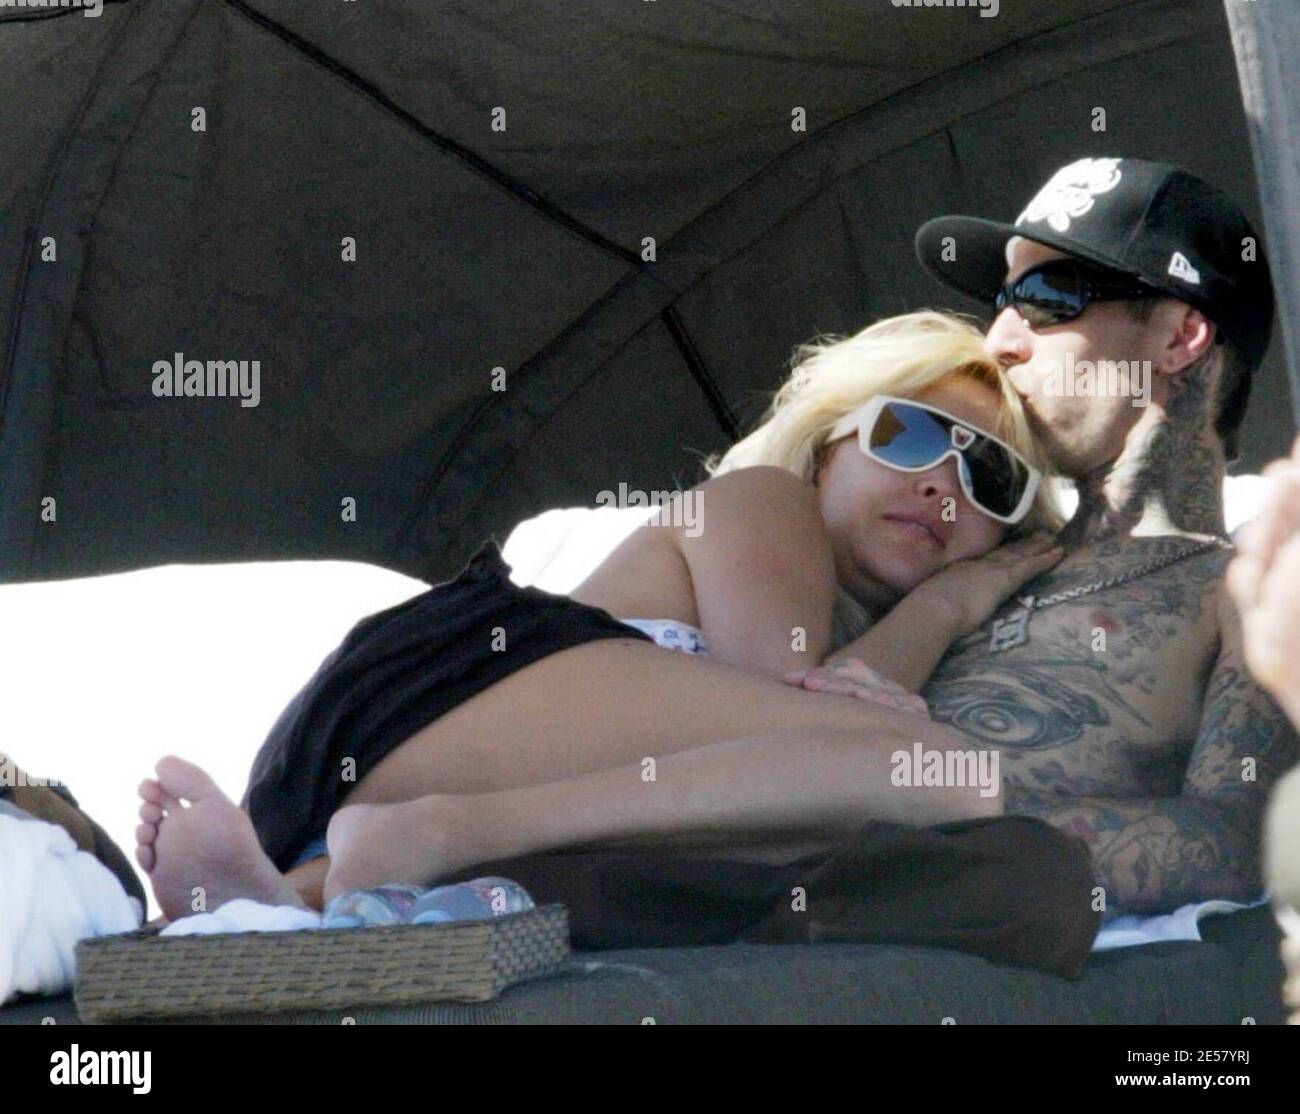 Reality TV show Meet The Barkers on off on again couple tattooed Blink 182 drummer Travis Barker and his Playboy Playmate and model wife Shanna Moakler enjoy a sunny Sunday afternoon on